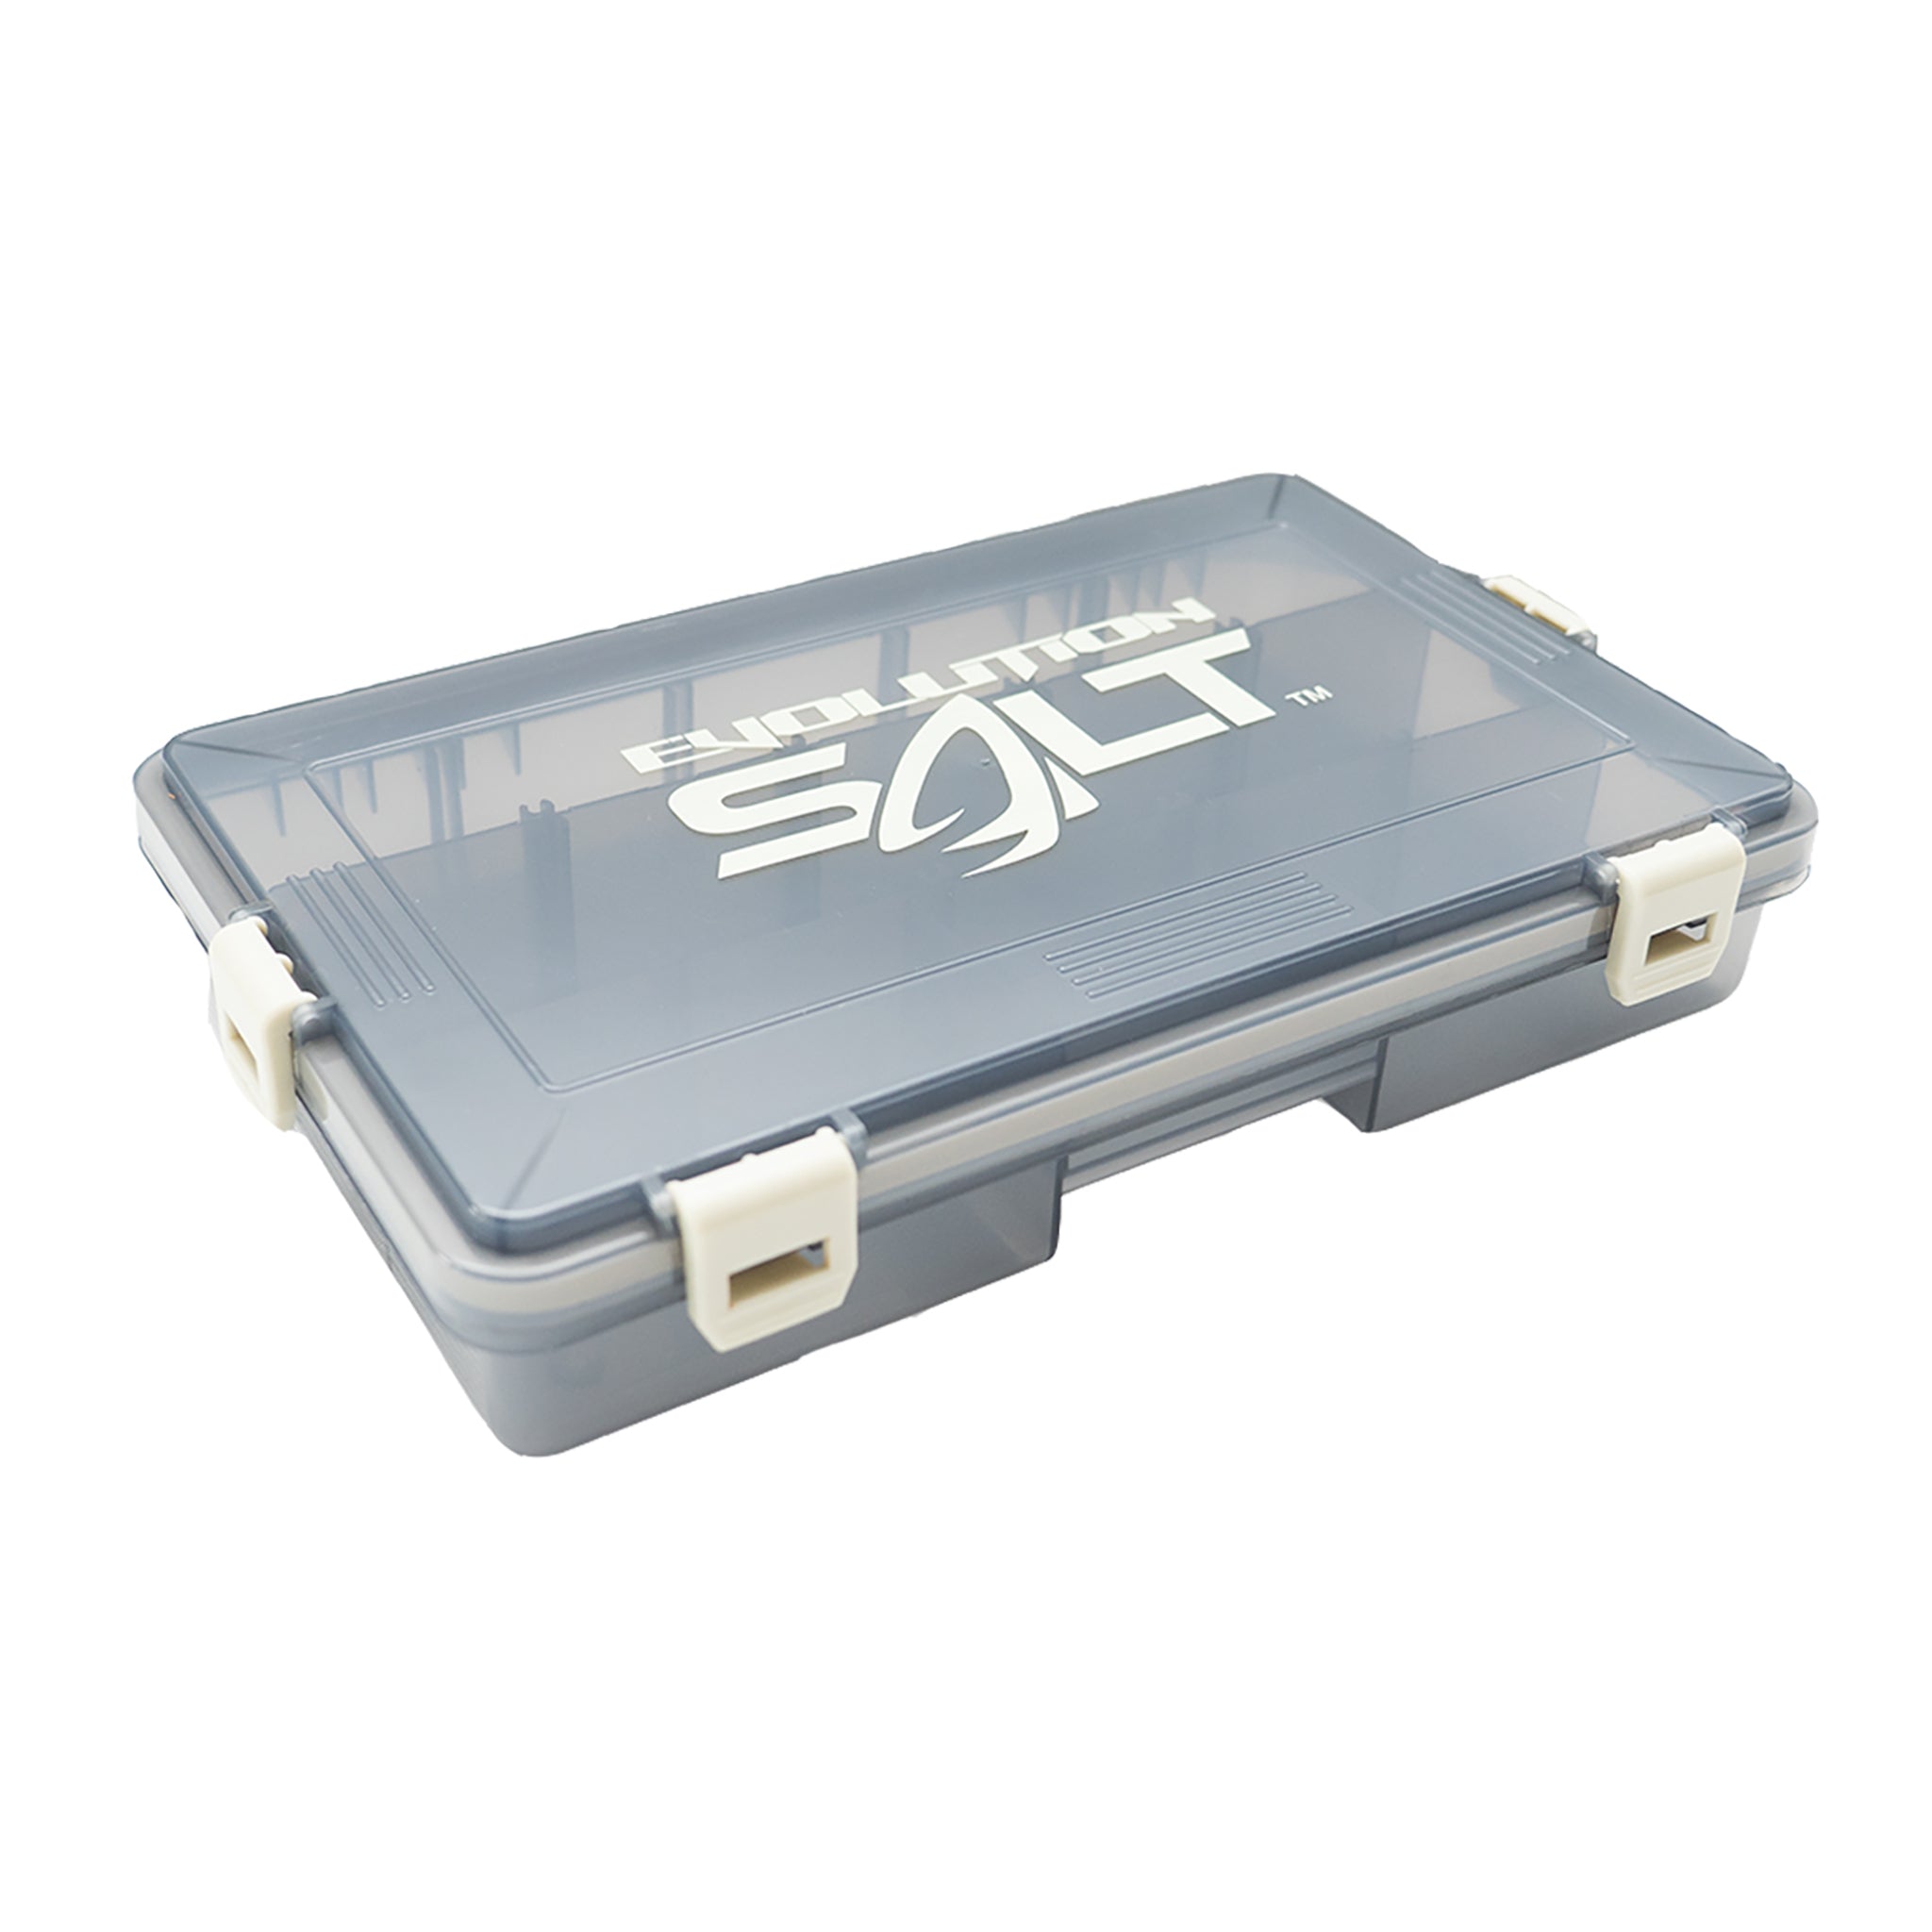 Evolution Clear Tackle Tray 3600